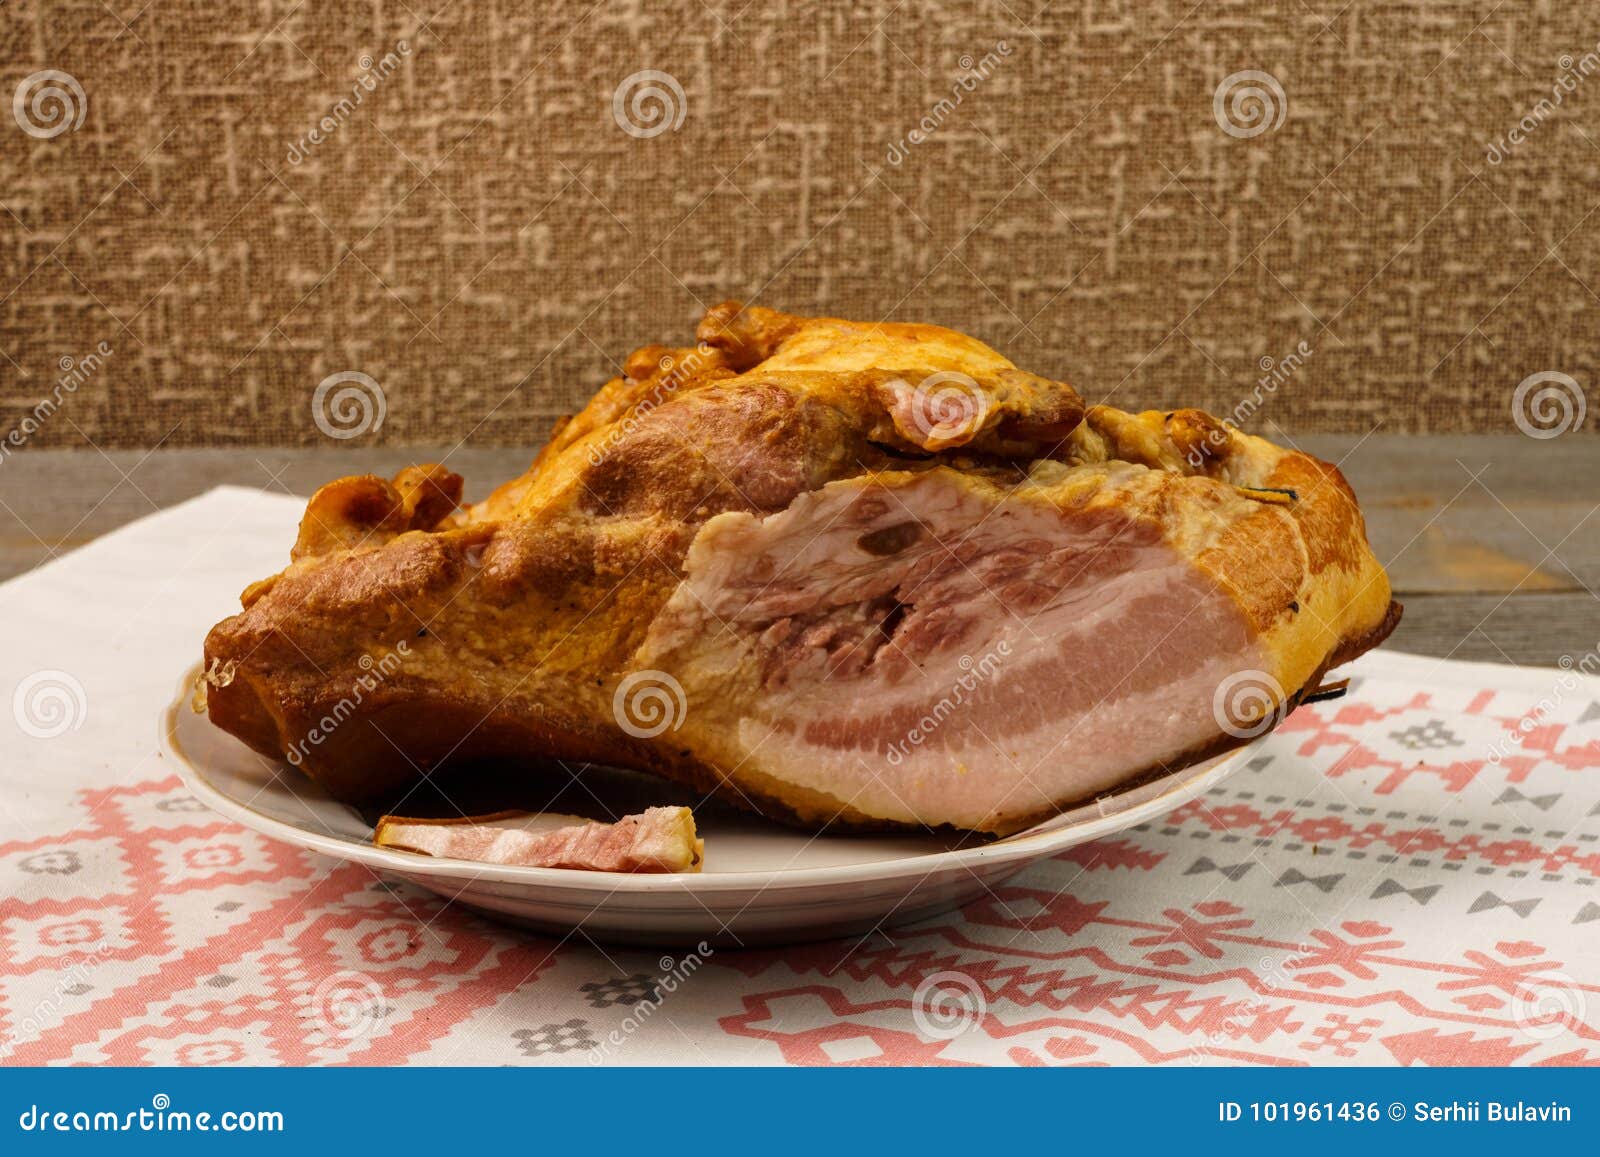 A Piece of Smoked Beef in a Dish on a Towel. Stock Photo - Image of ...